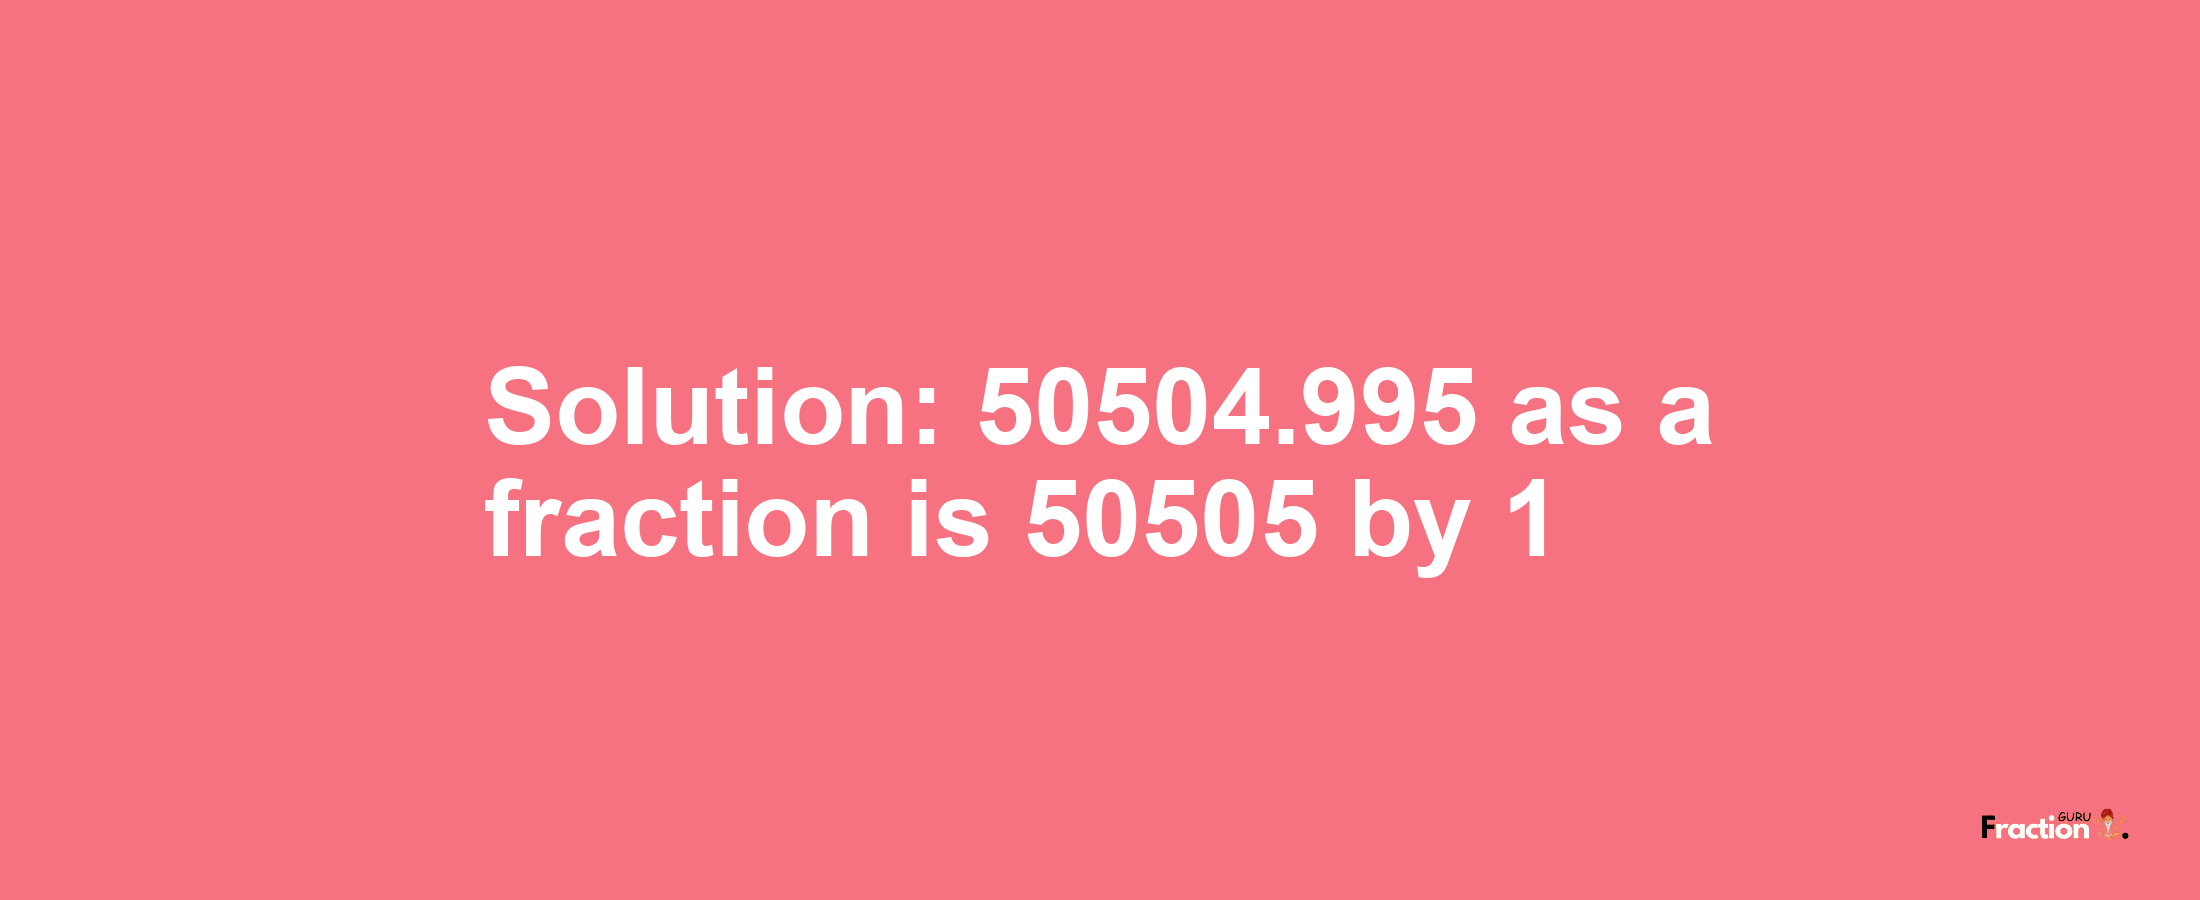 Solution:50504.995 as a fraction is 50505/1